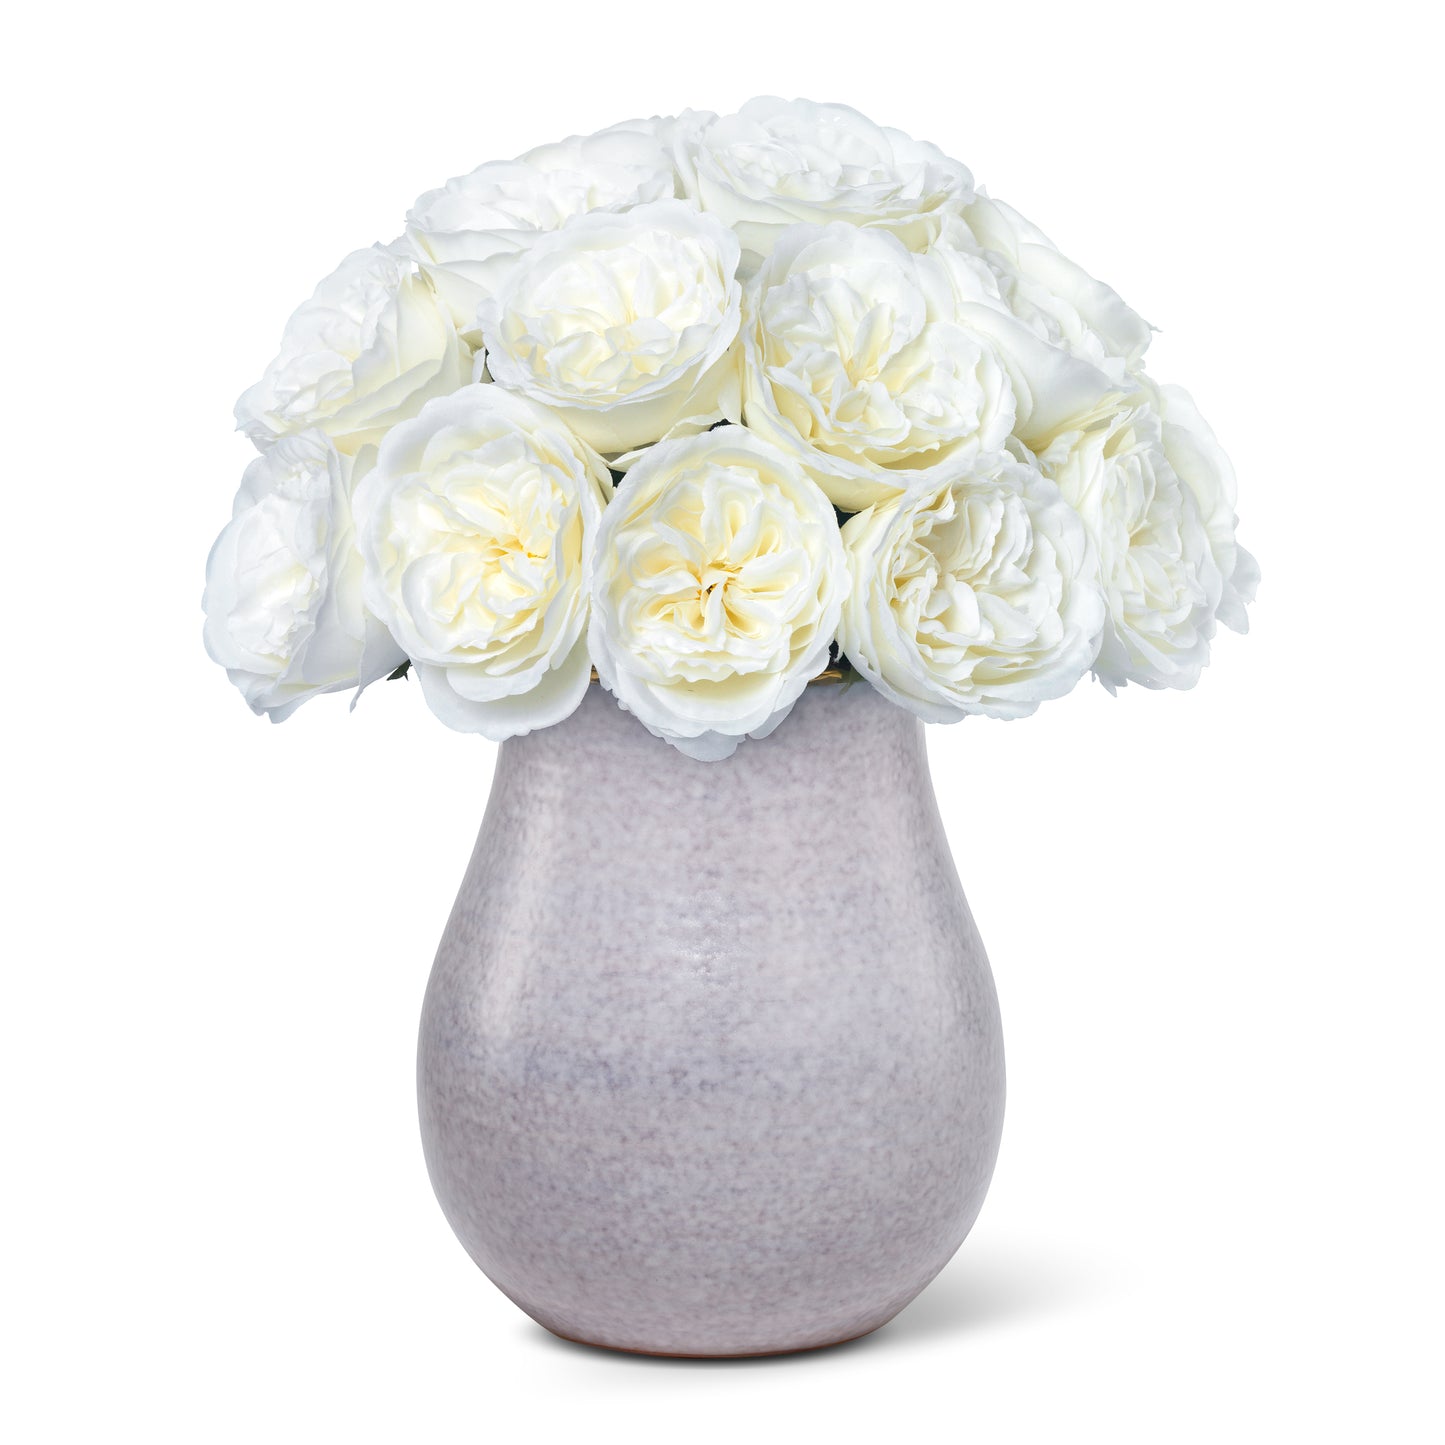 White Cottage Roses in Romina Vase, Lavender Haze- Diane James Home | Faux Floral Couture Handmade In The USA